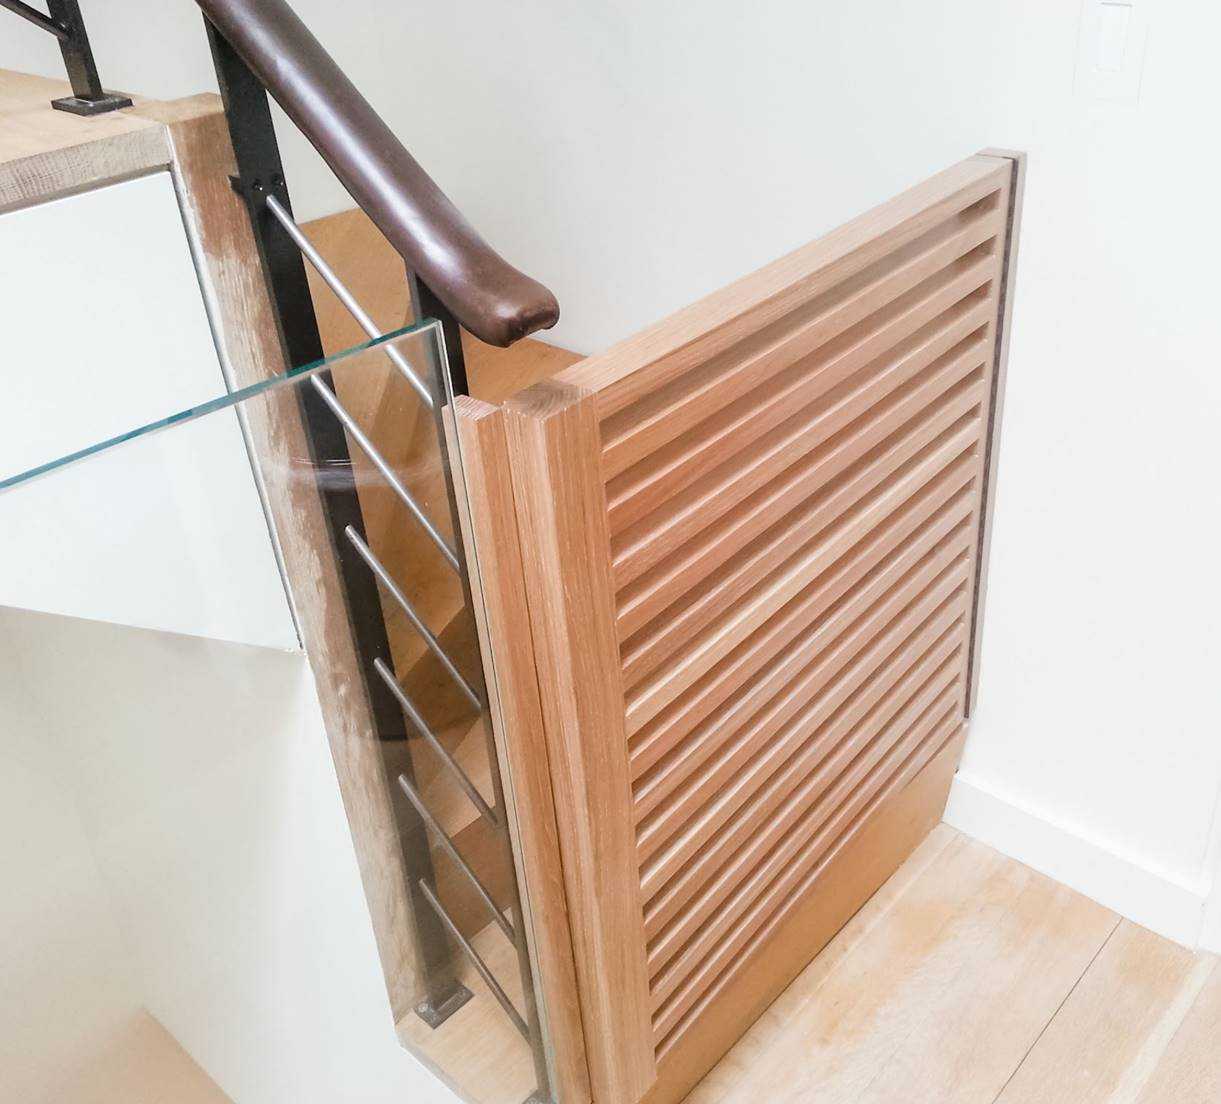 Integrated dog door made of wood on staircase